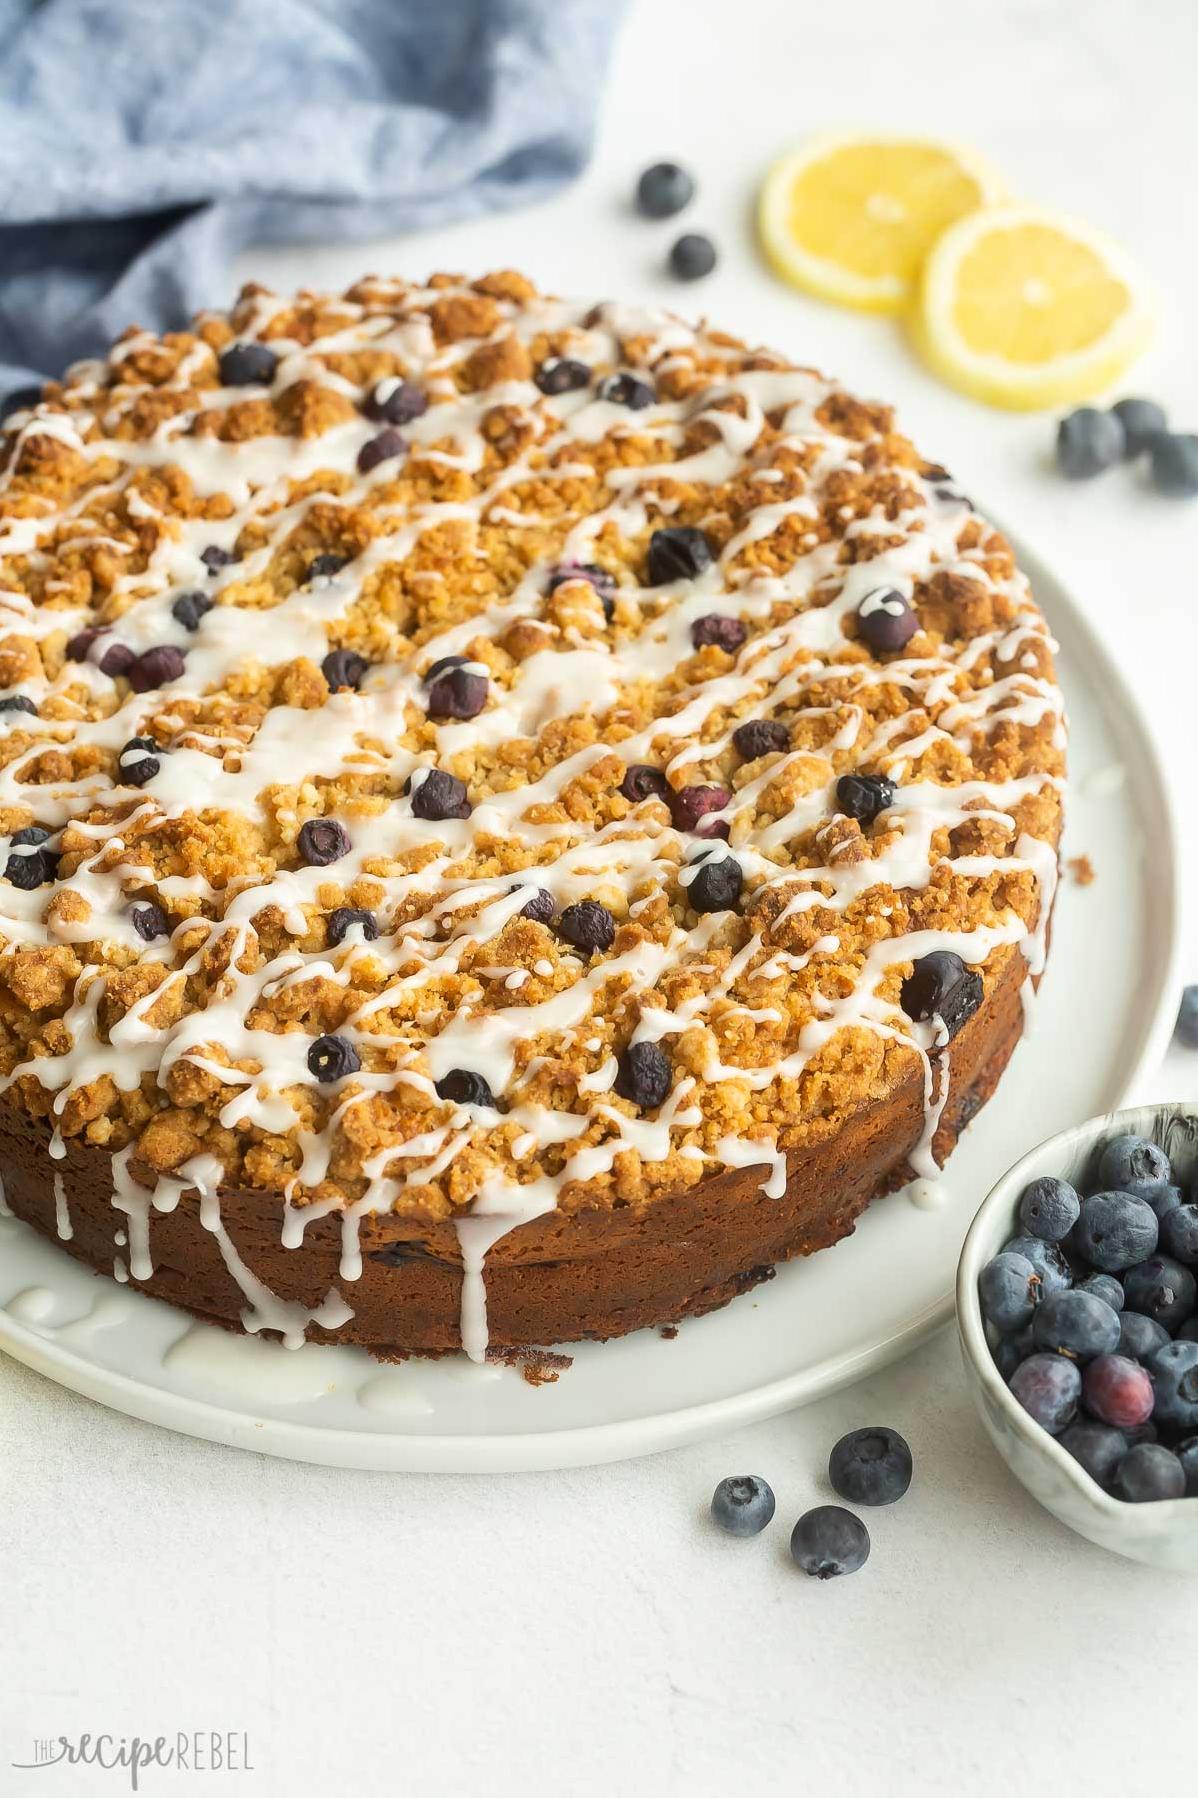  The aroma of our Blueberry Coffee Cake will fill your home and awaken your senses.